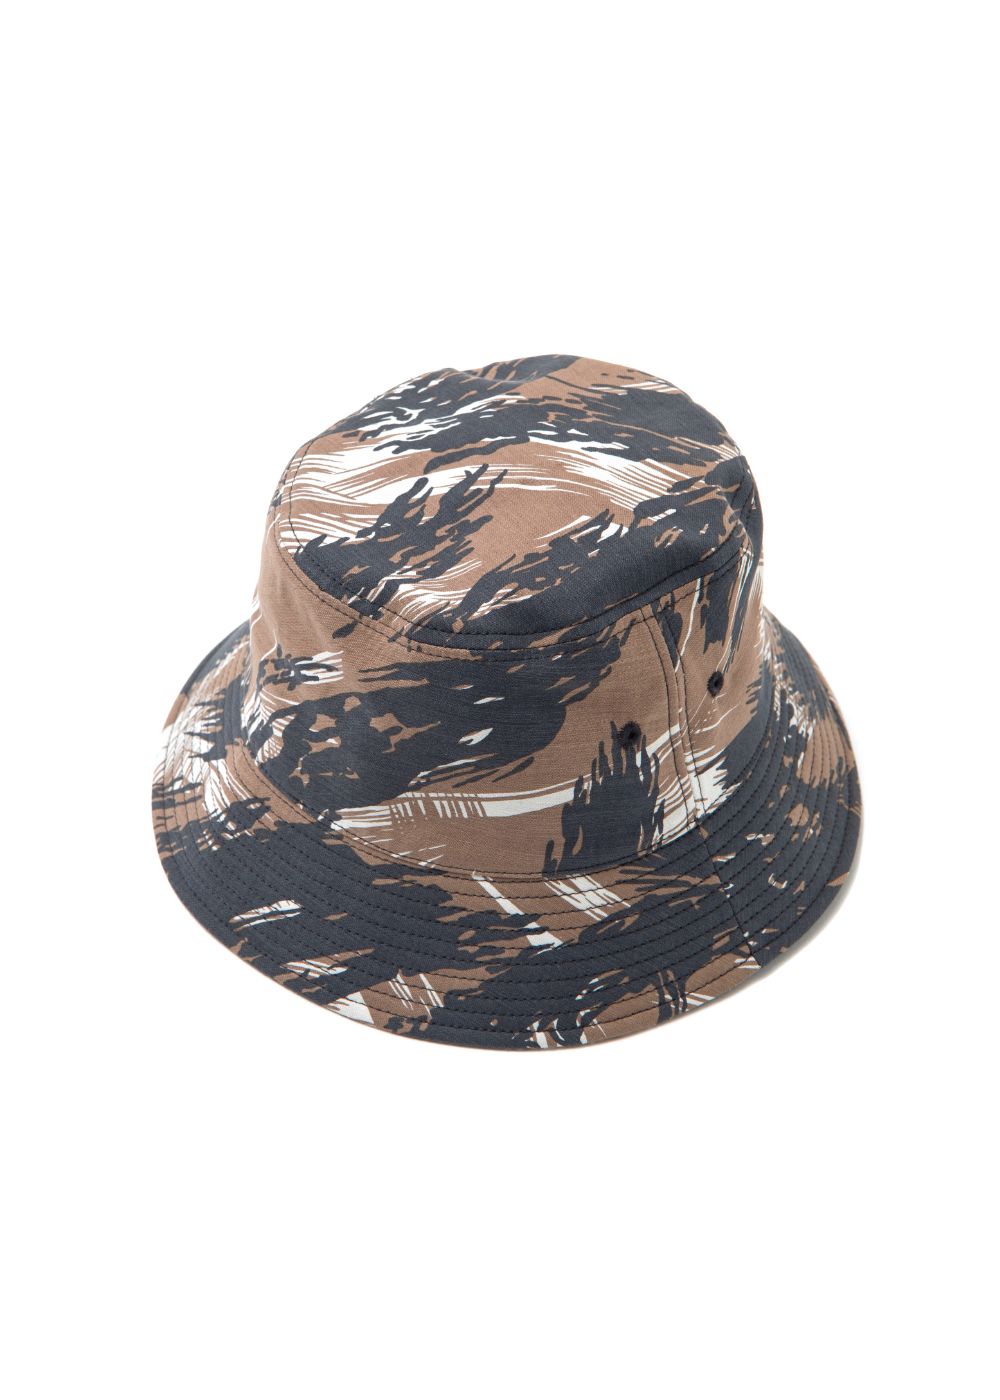 RATS - CAMO BUCKET HAT (CAMOUFLAGE) / カモ バケットハット | LOOPHOLE